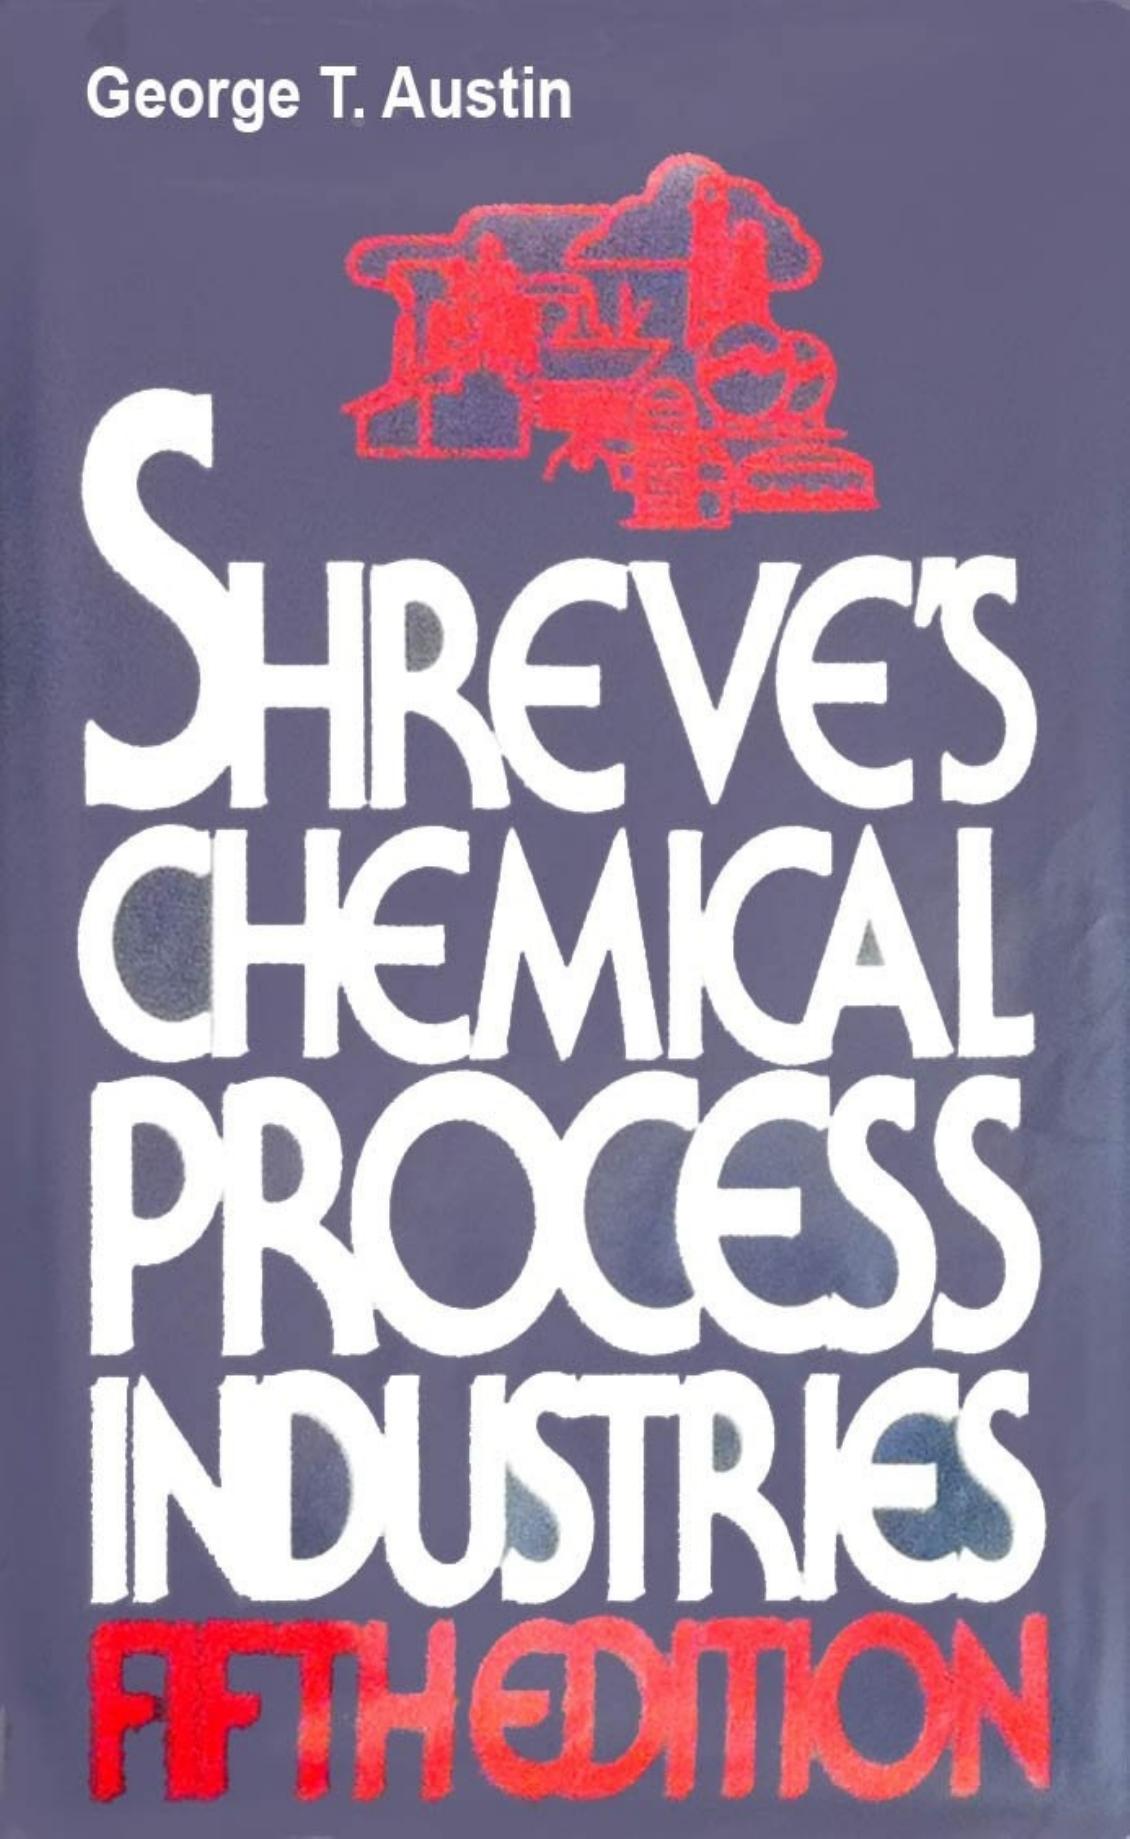 Shreves Chemical Process Industries Handbook, Fifth Edition